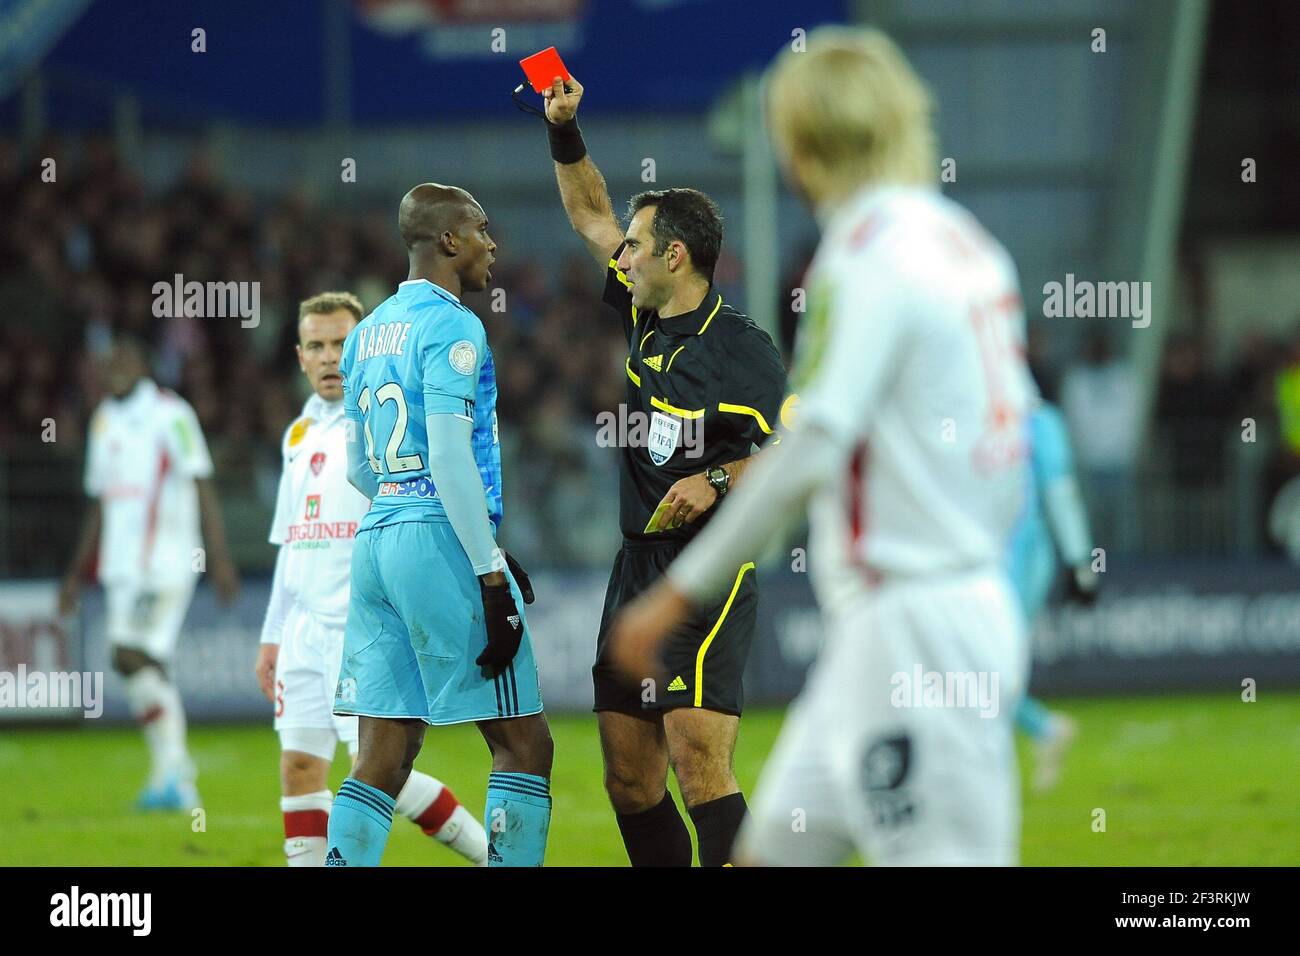 FOOTBALL - FRENCH CHAMPIONSHIP 2010/2011 - L1 - STADE BRESTOIS v OLYMPIQUE  MARSEILLE - 22/12/2010 - PHOTO PASCAL ALLEE / DPPI - THE REFEREE MR HERVE  PICCIRILLO GIVES A RED CARD TO